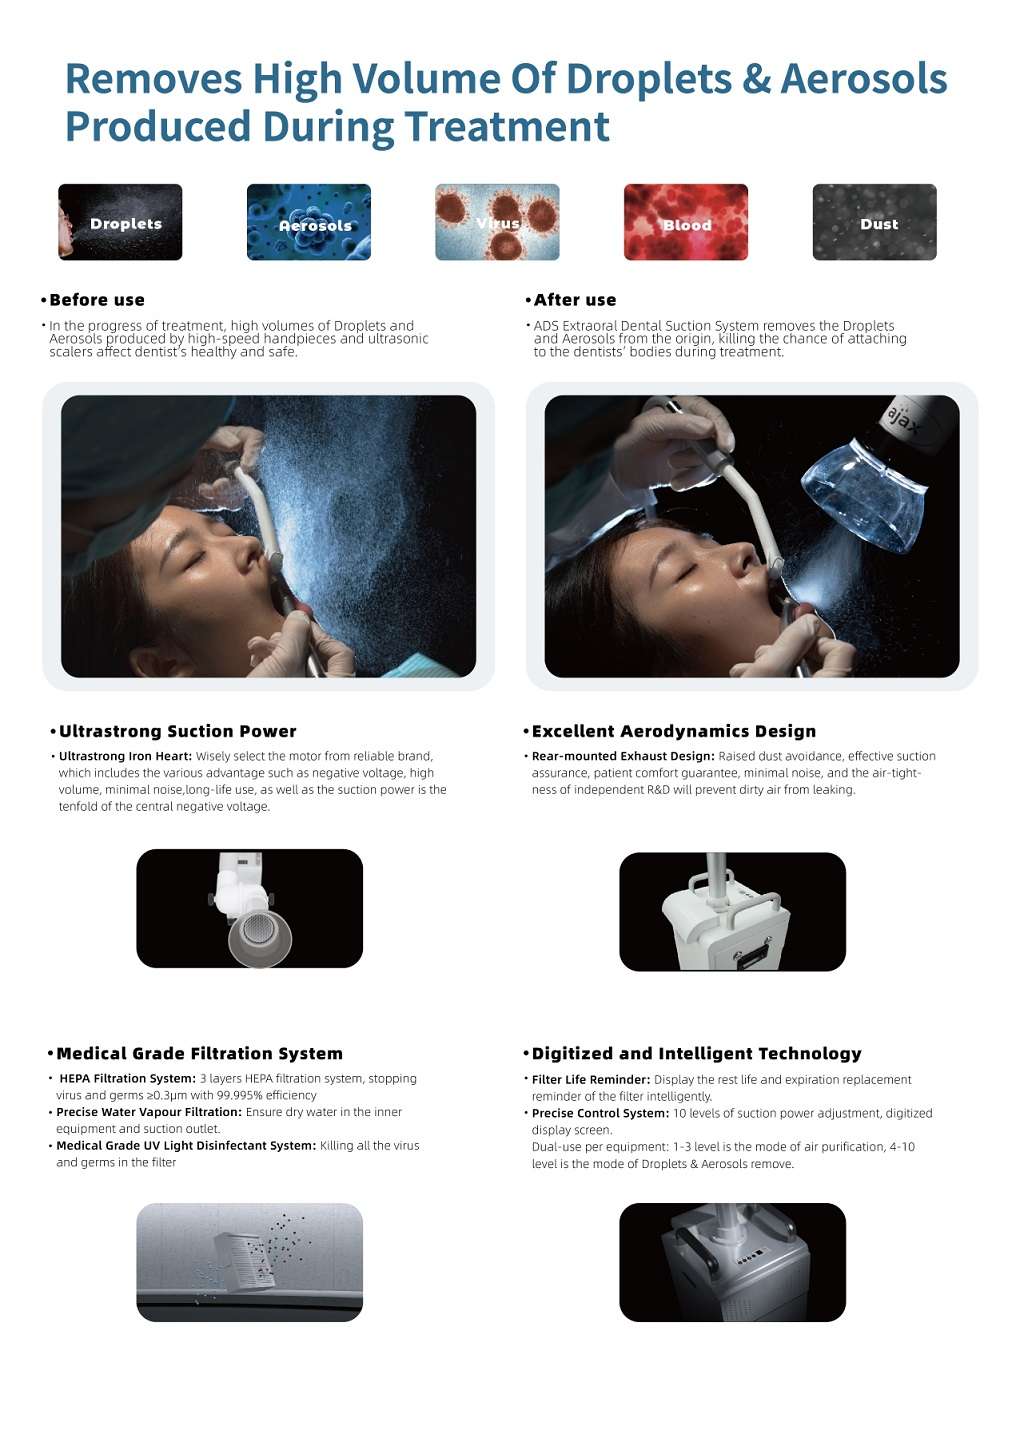 ADS Extraoral Dental Suction System